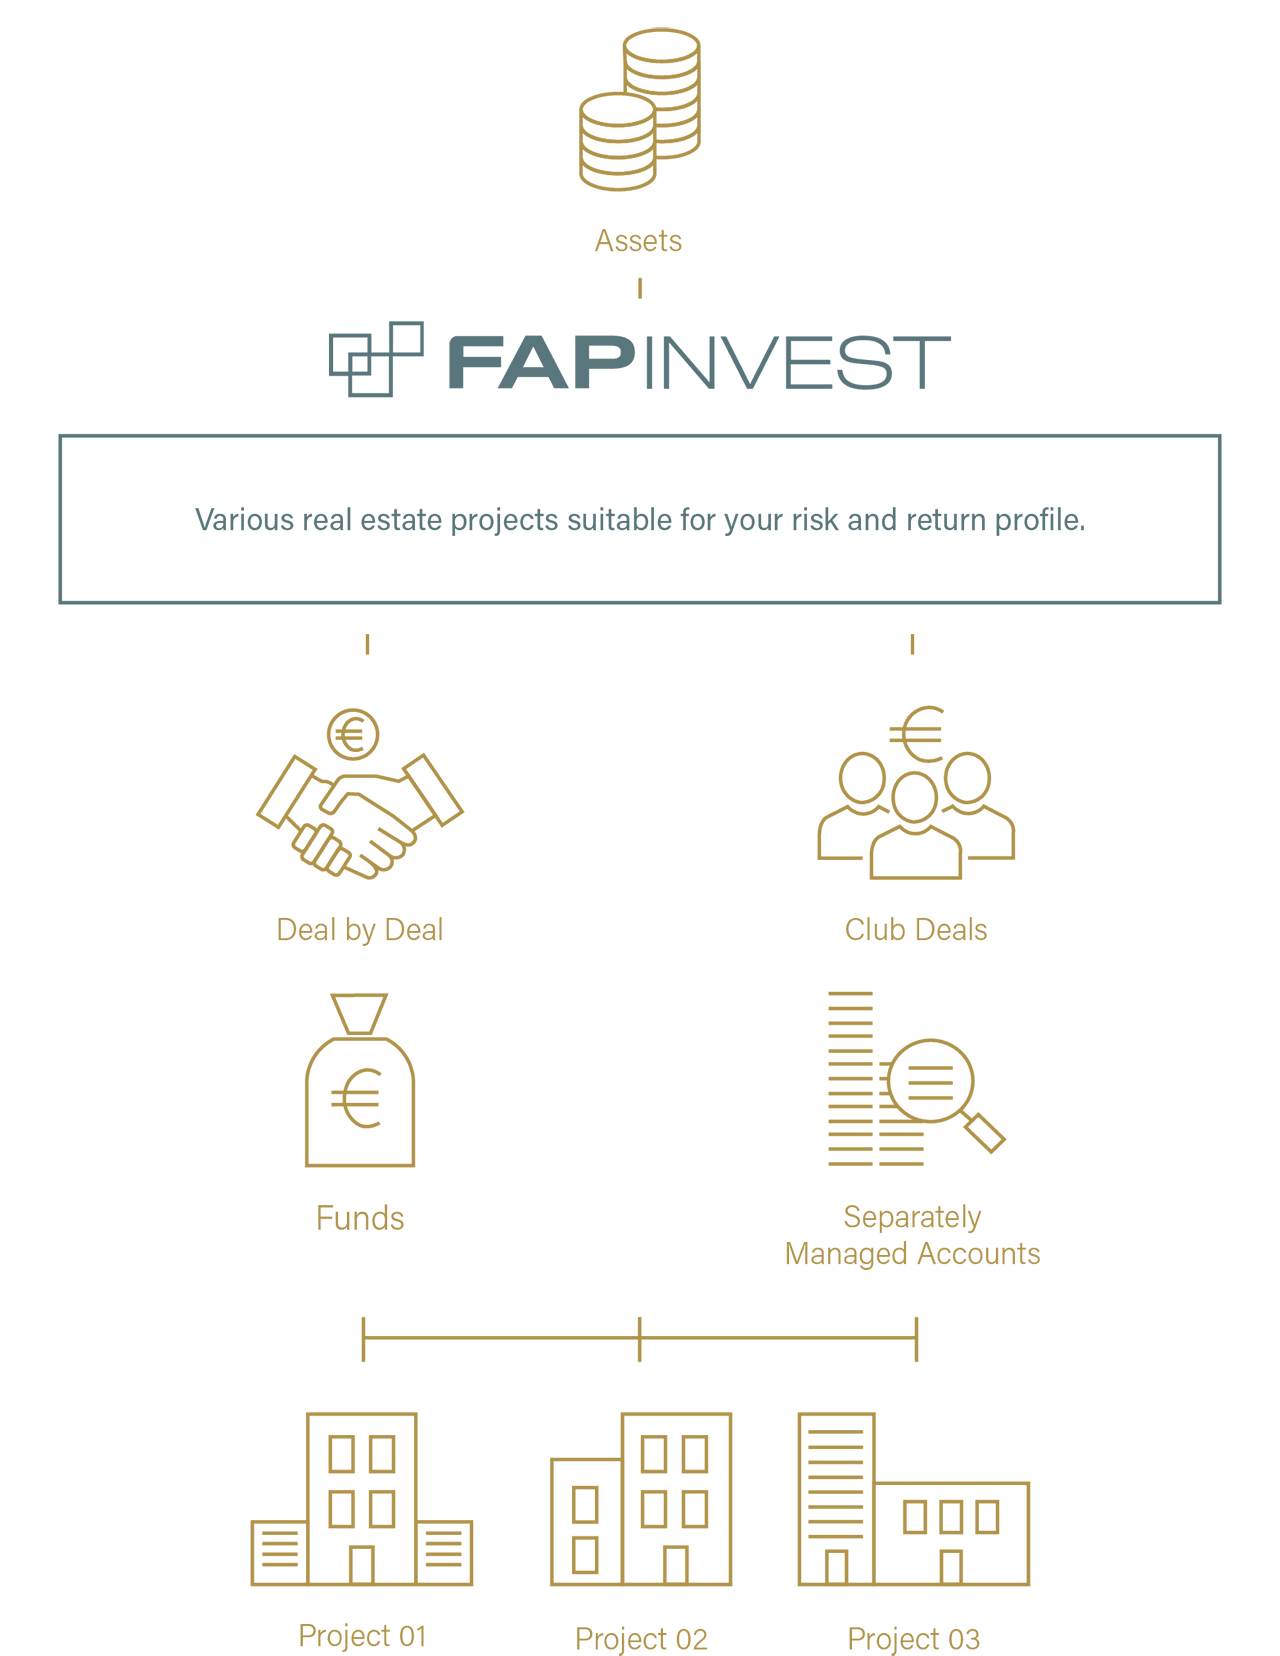 FAP Invest - Deal by Deal, Club Deals, Fonds, Separately Managed Accounts